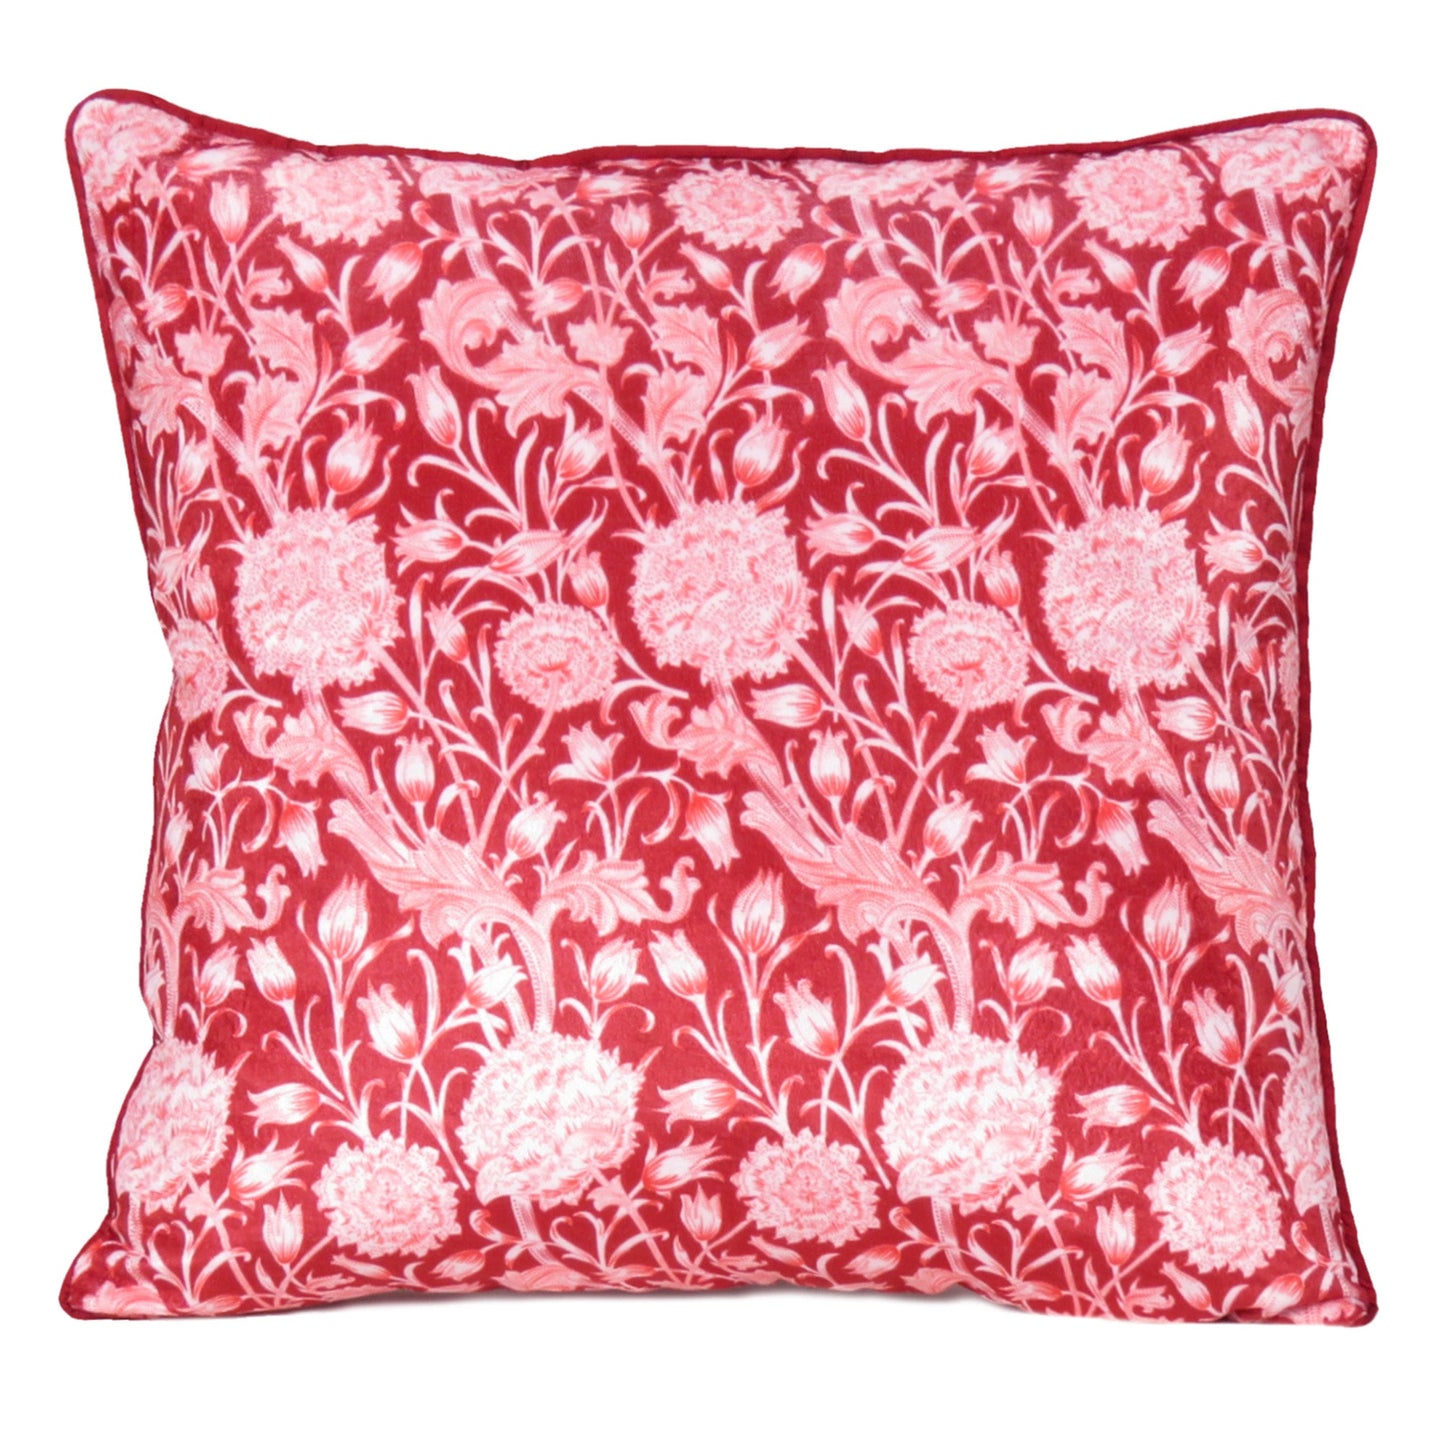 Velvet Polydupion Printed Cushion Covers in Set of 2 - Red & White